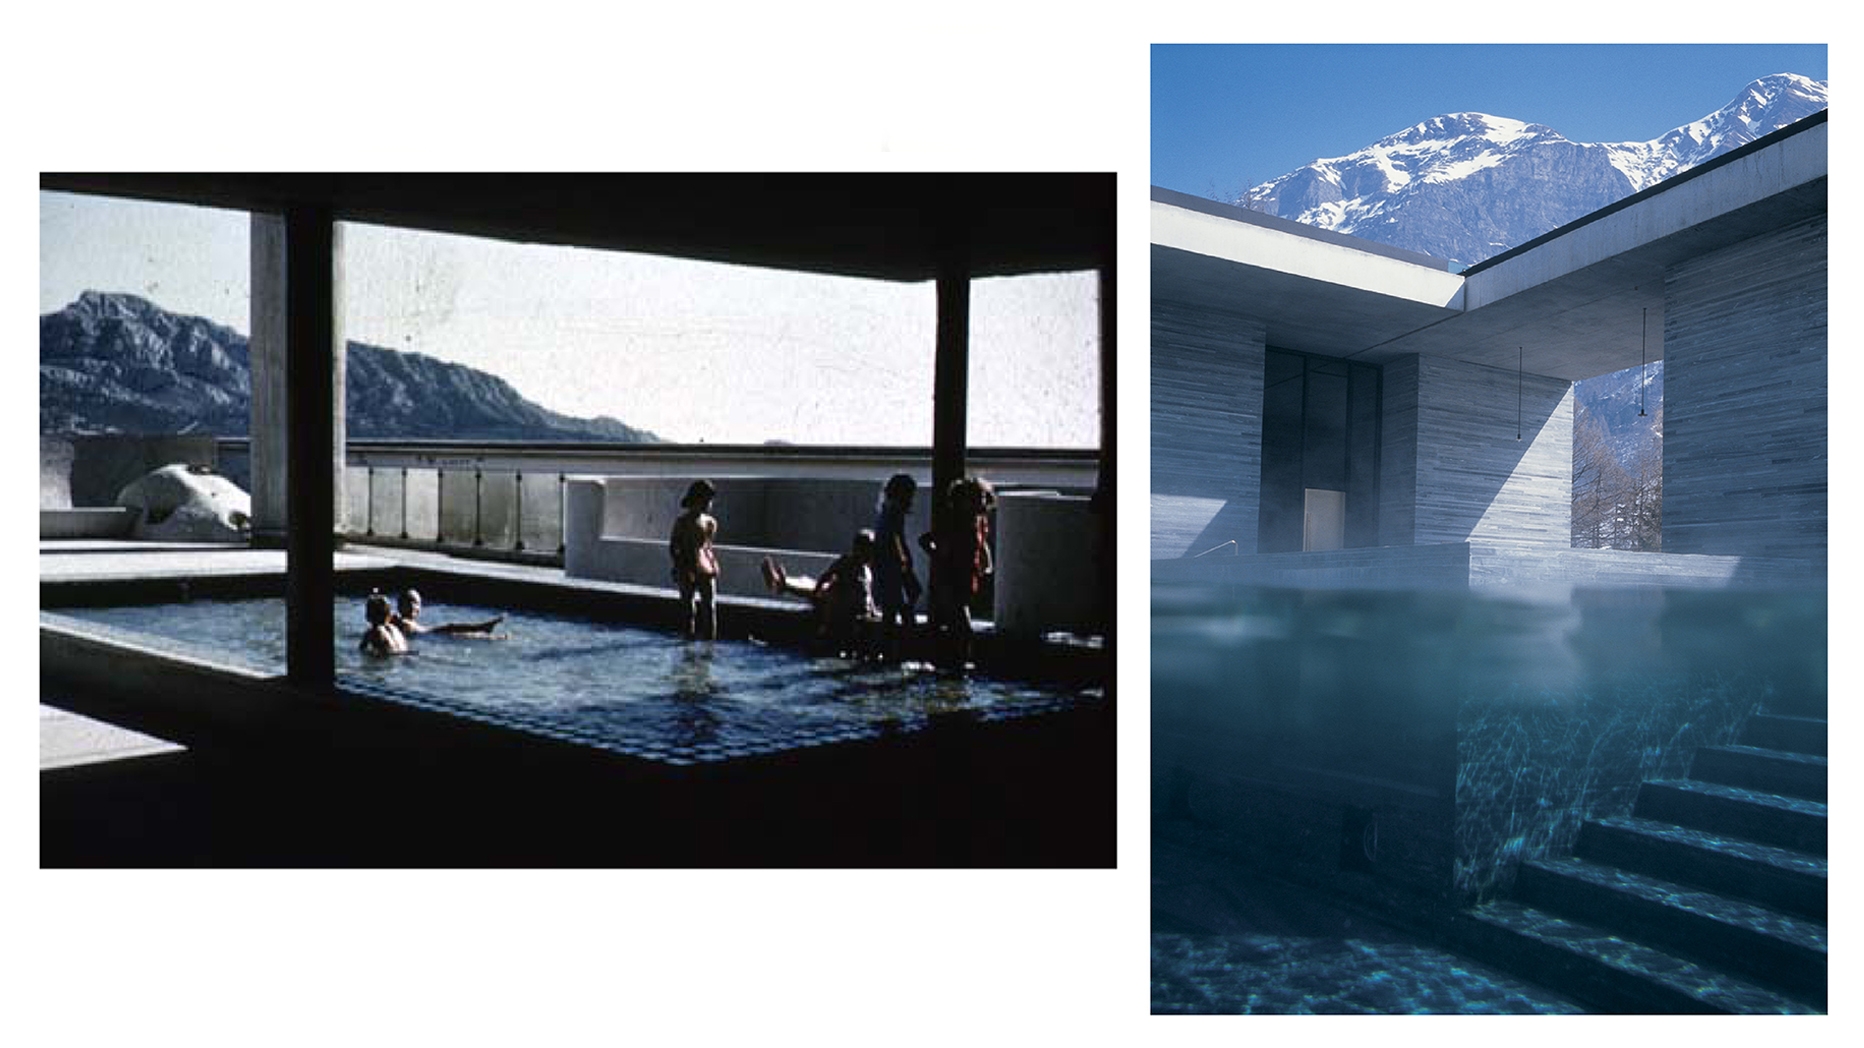 Le Corbusier's Unité d'habitation in Marseille on the left,  Peter Zumthor's Therme Vals on the right